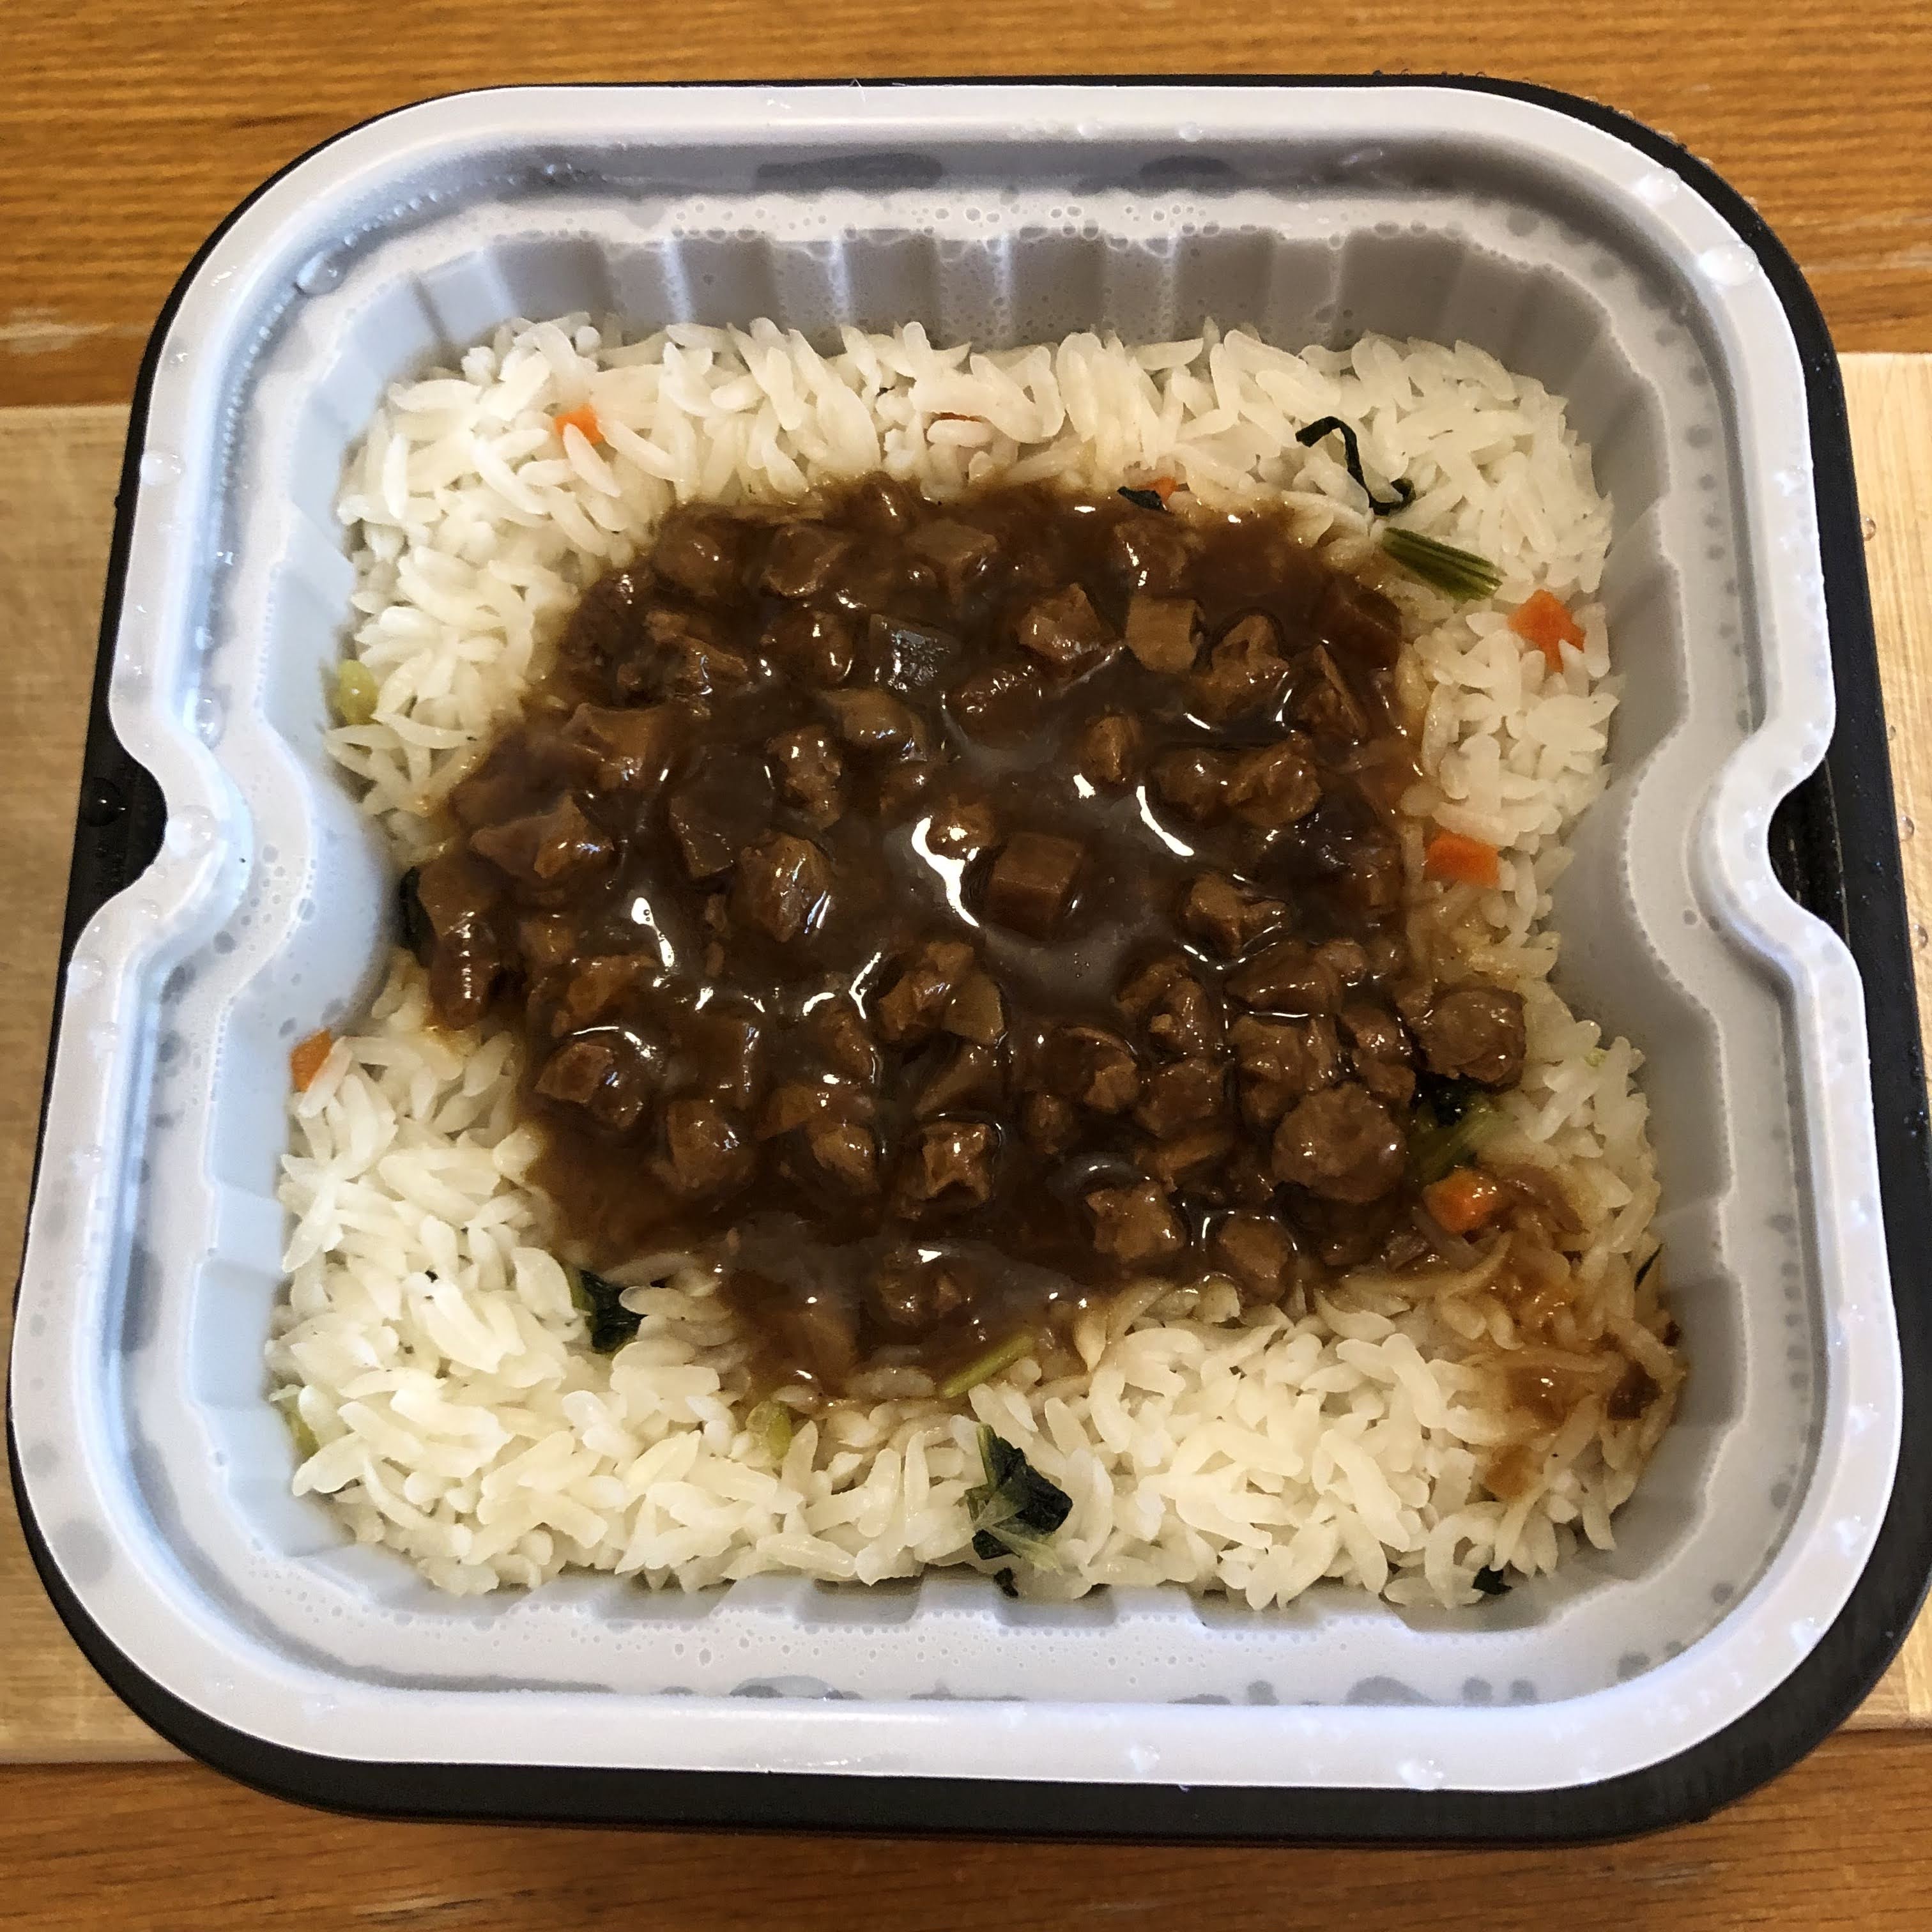 DAY DAY COOK Self Heating Soybean Rice Bowl Review